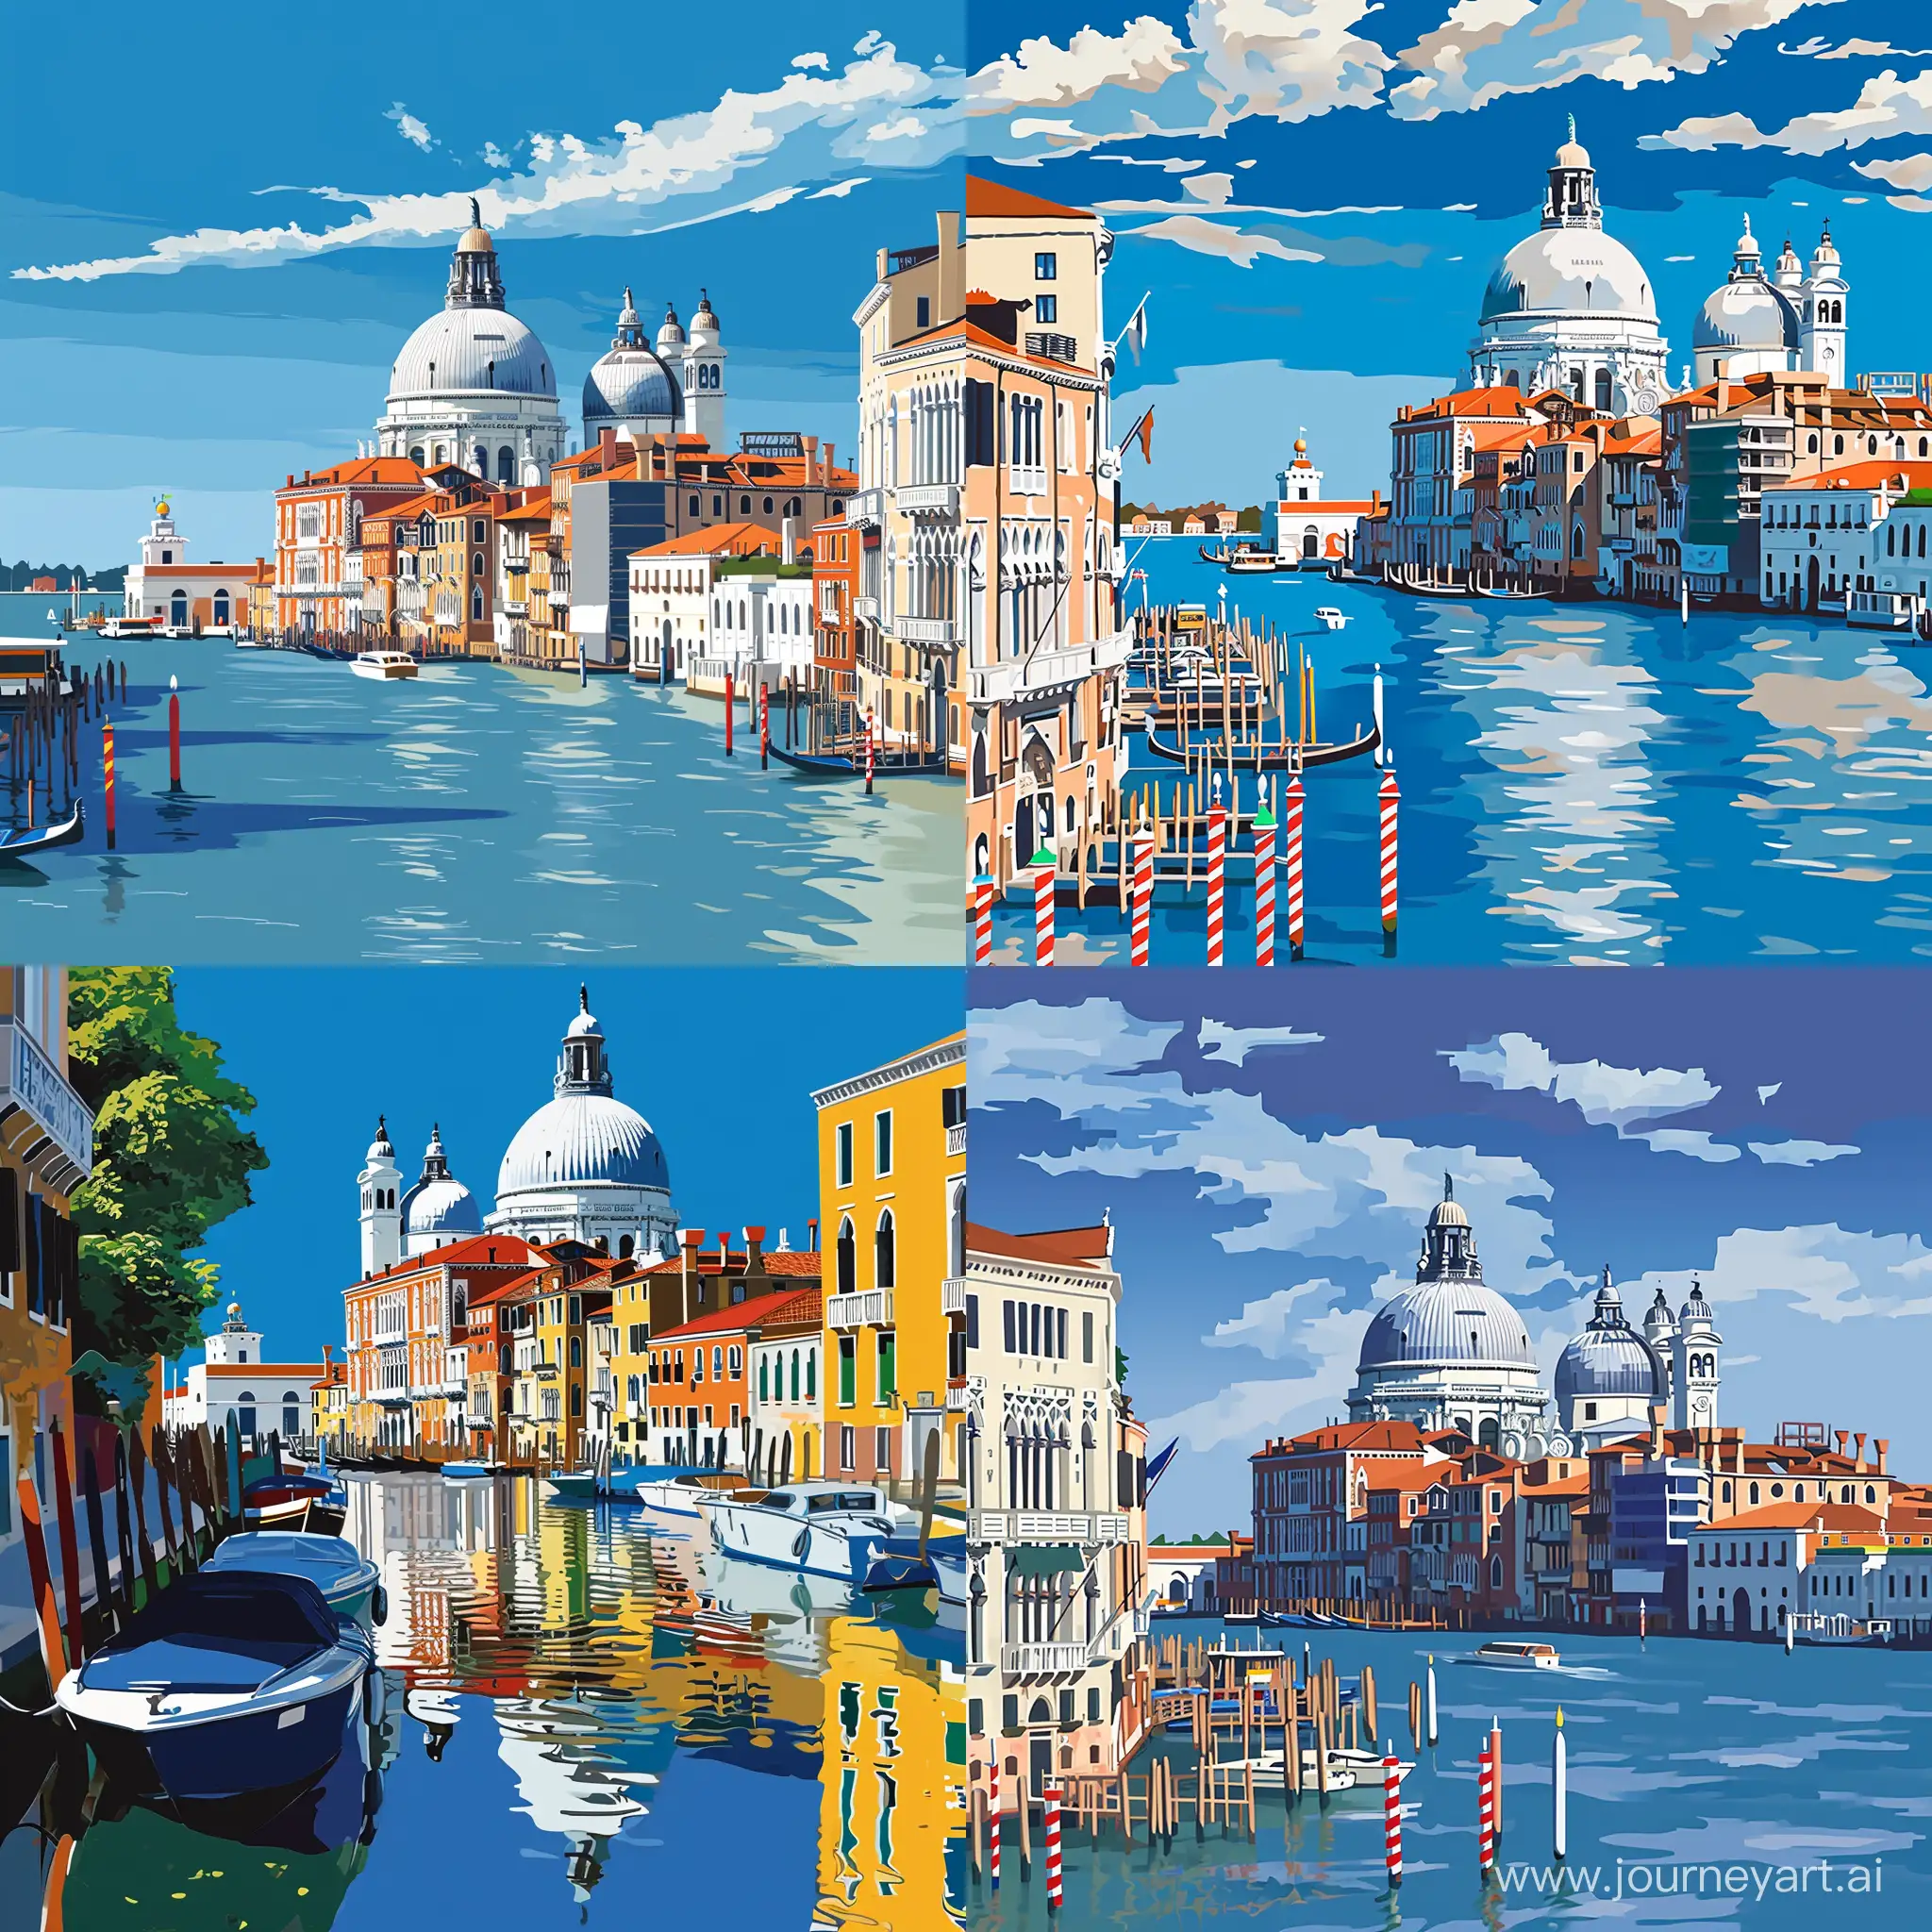 A picture of Venice city inspired by Hiroshi Nagai and the City Pop Art Style